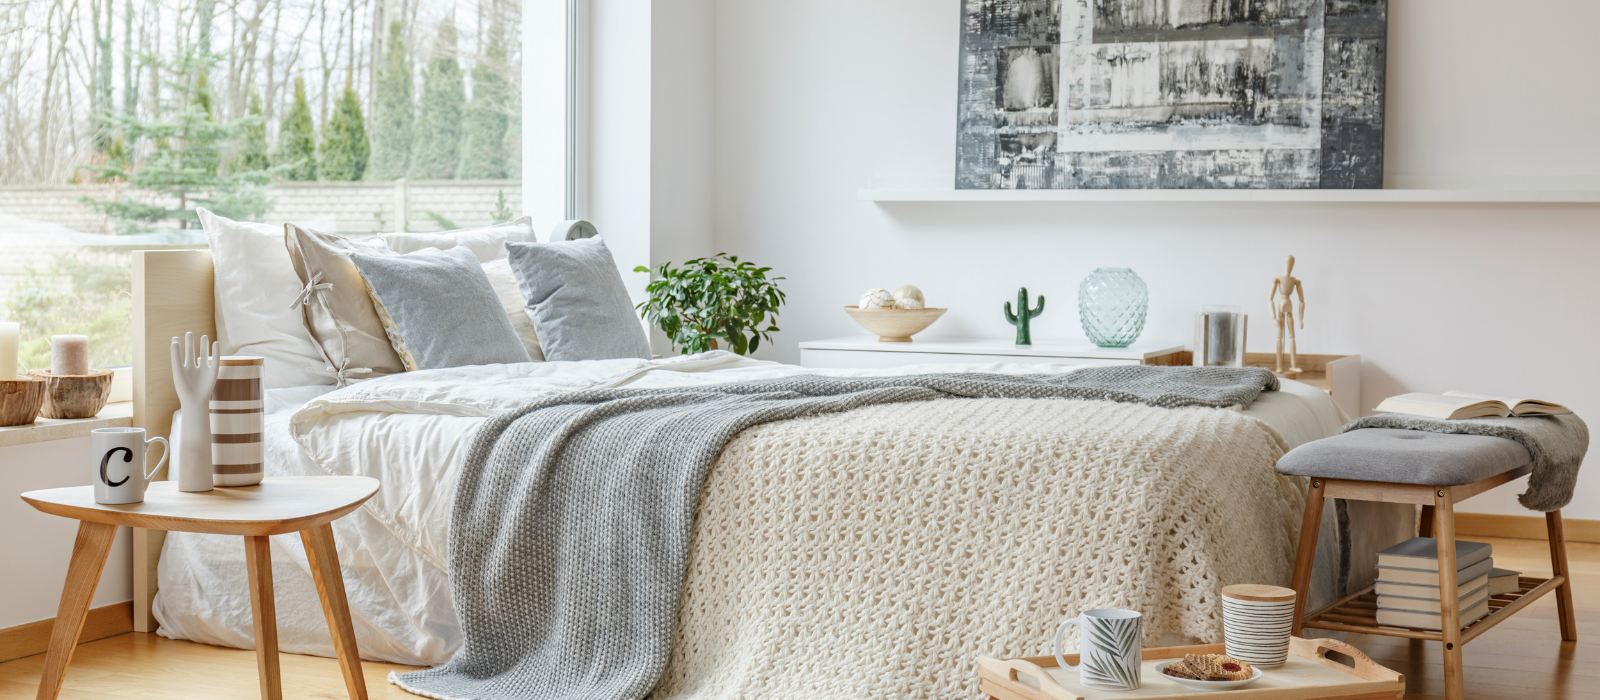 How to decorate Scandinavian Scandi Interior Design Style in your home.